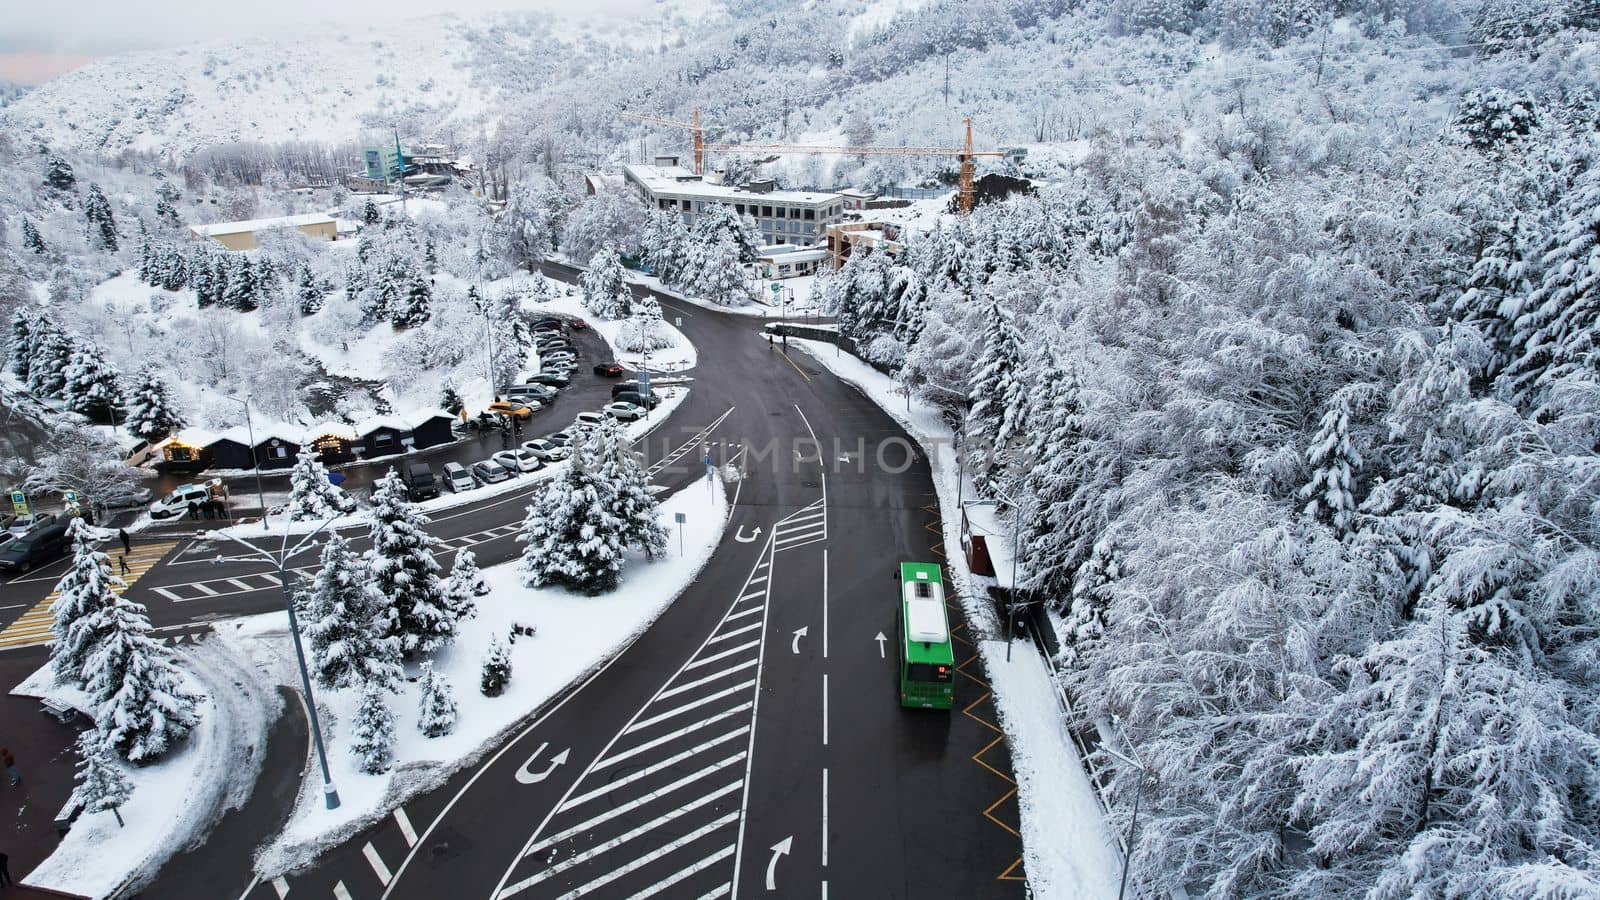 Snowy fairy-tale road in a mountain forest. Christmas or New Year has come. Coniferous trees in the snow. There is a green bus, people are walking. Light fog. The view from the drone. Medeo, Almaty